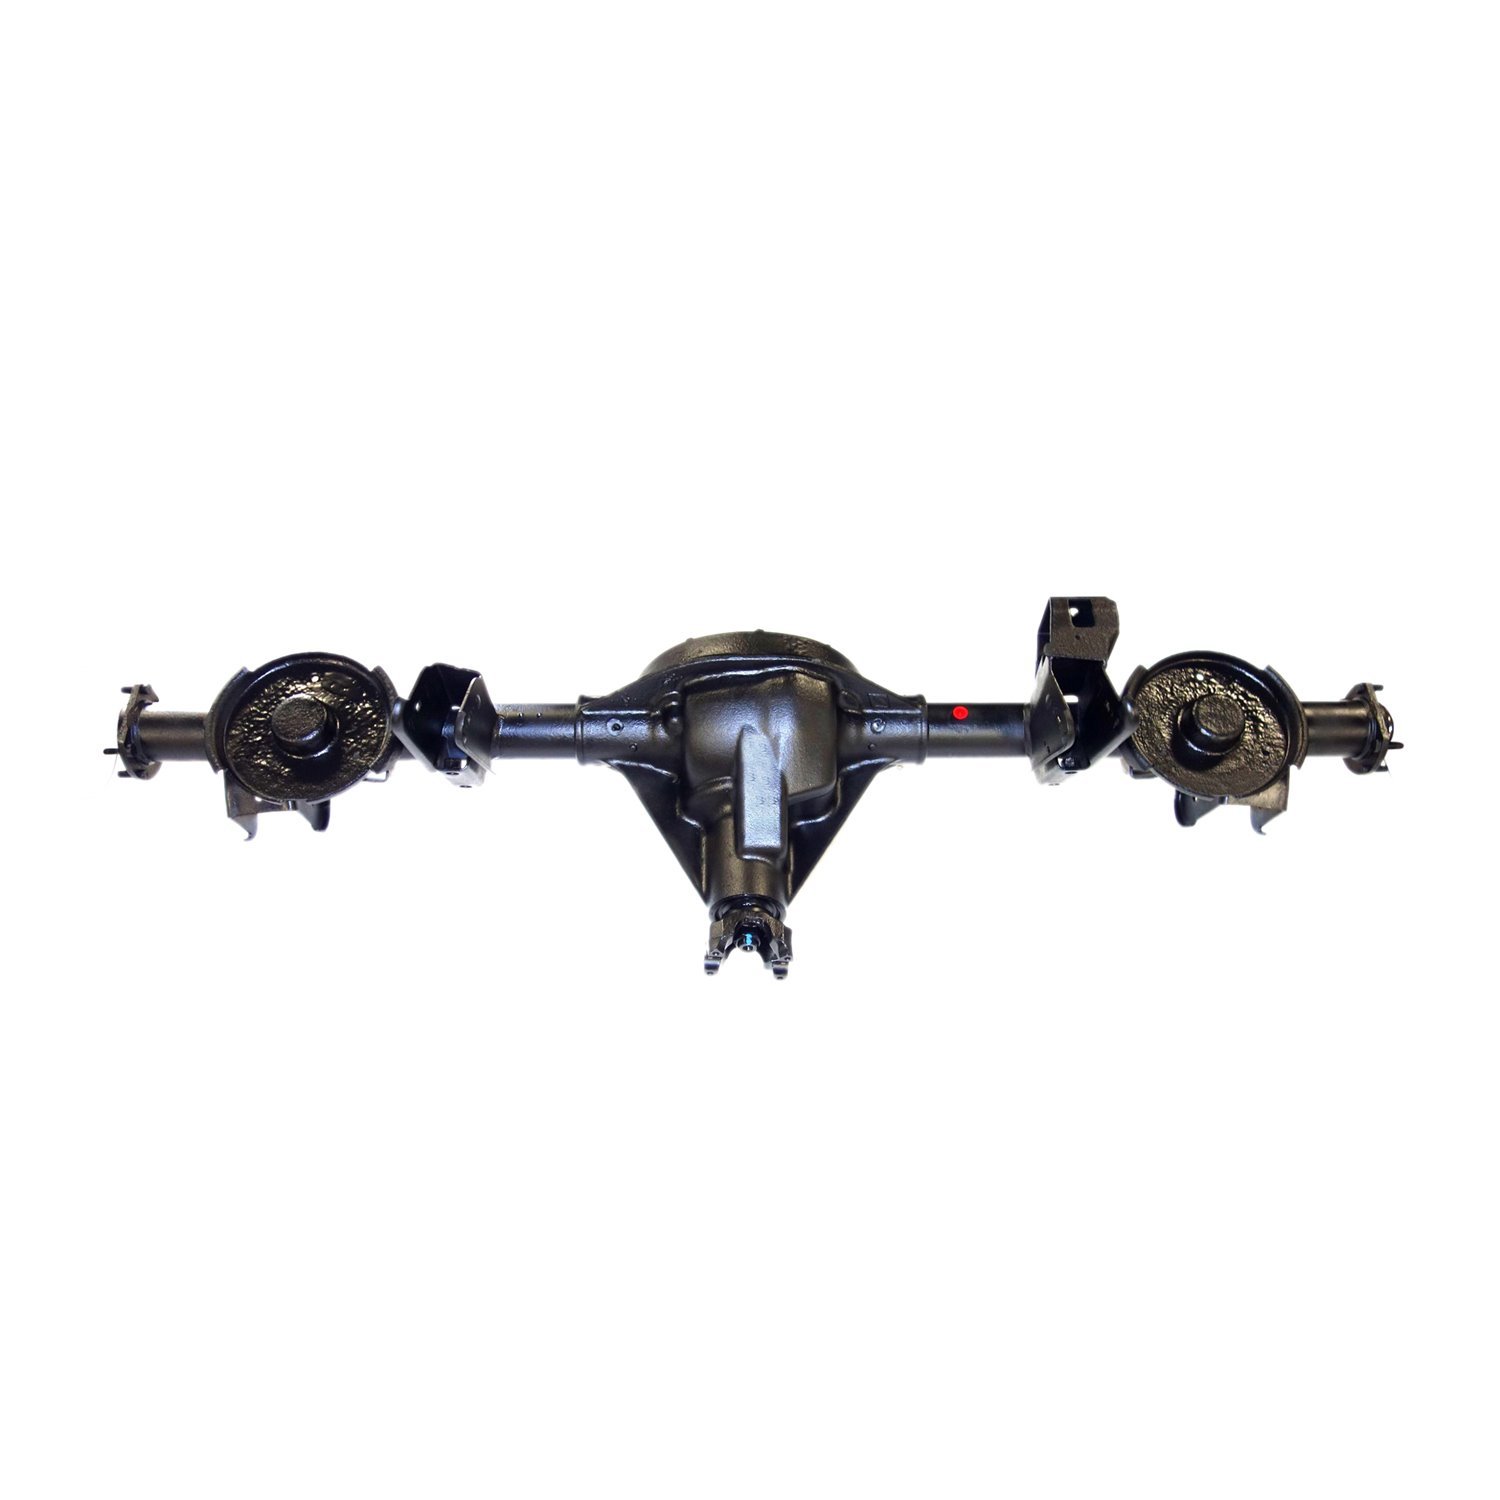 Remanufactured Complete Axle Assembly for Dana 35 90-95 Jeep Wrangler 3.55 Ratio w/o ABS